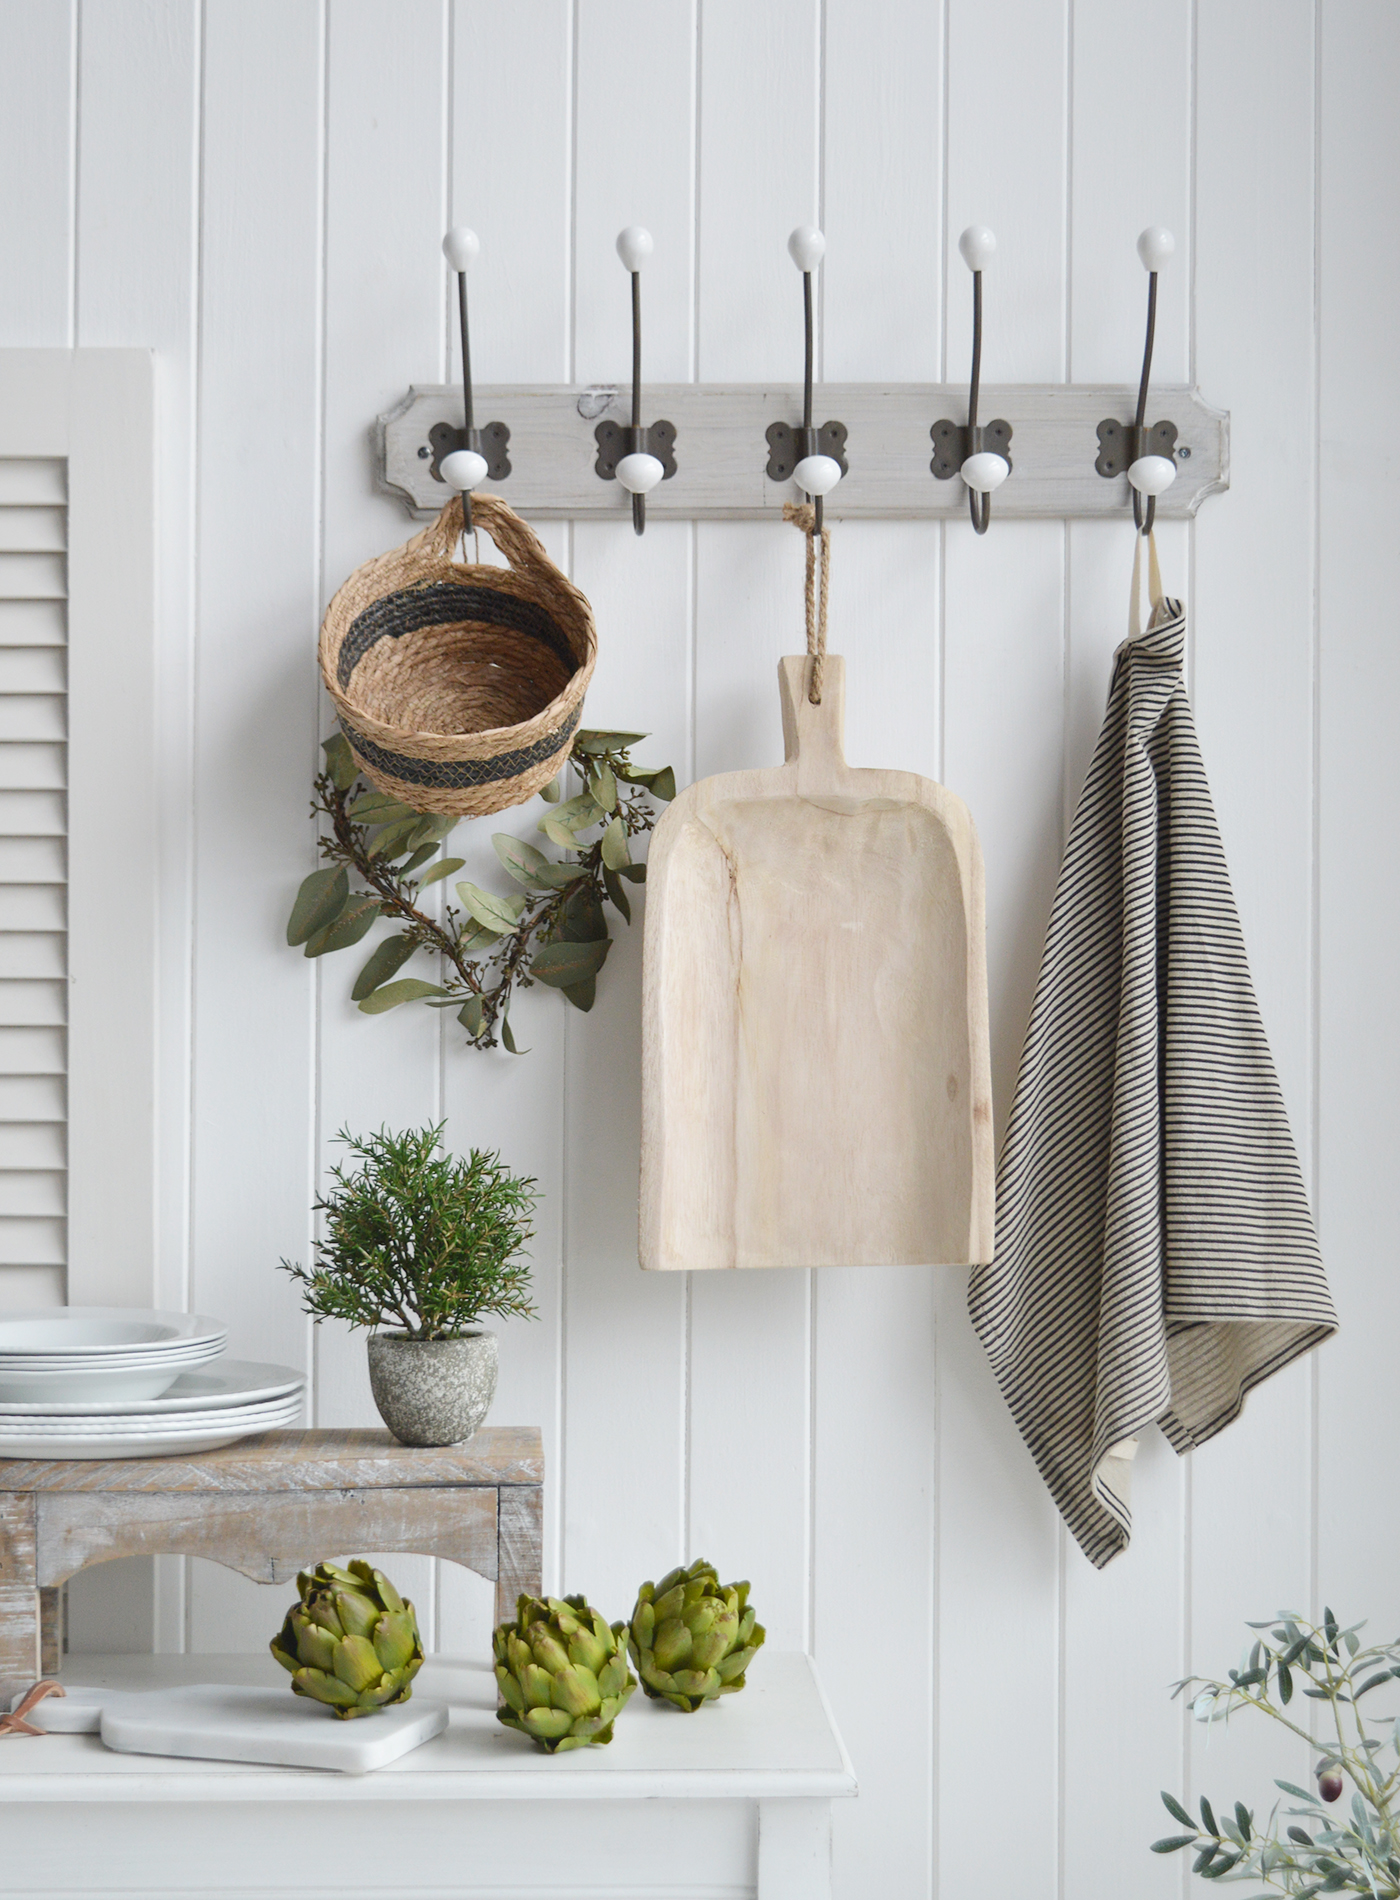 Chadwick tray haning on the Pawtucket hooks with the Plympton towel, artificial green artichokes, Rosemary bush for New England farmhouse style kitchens